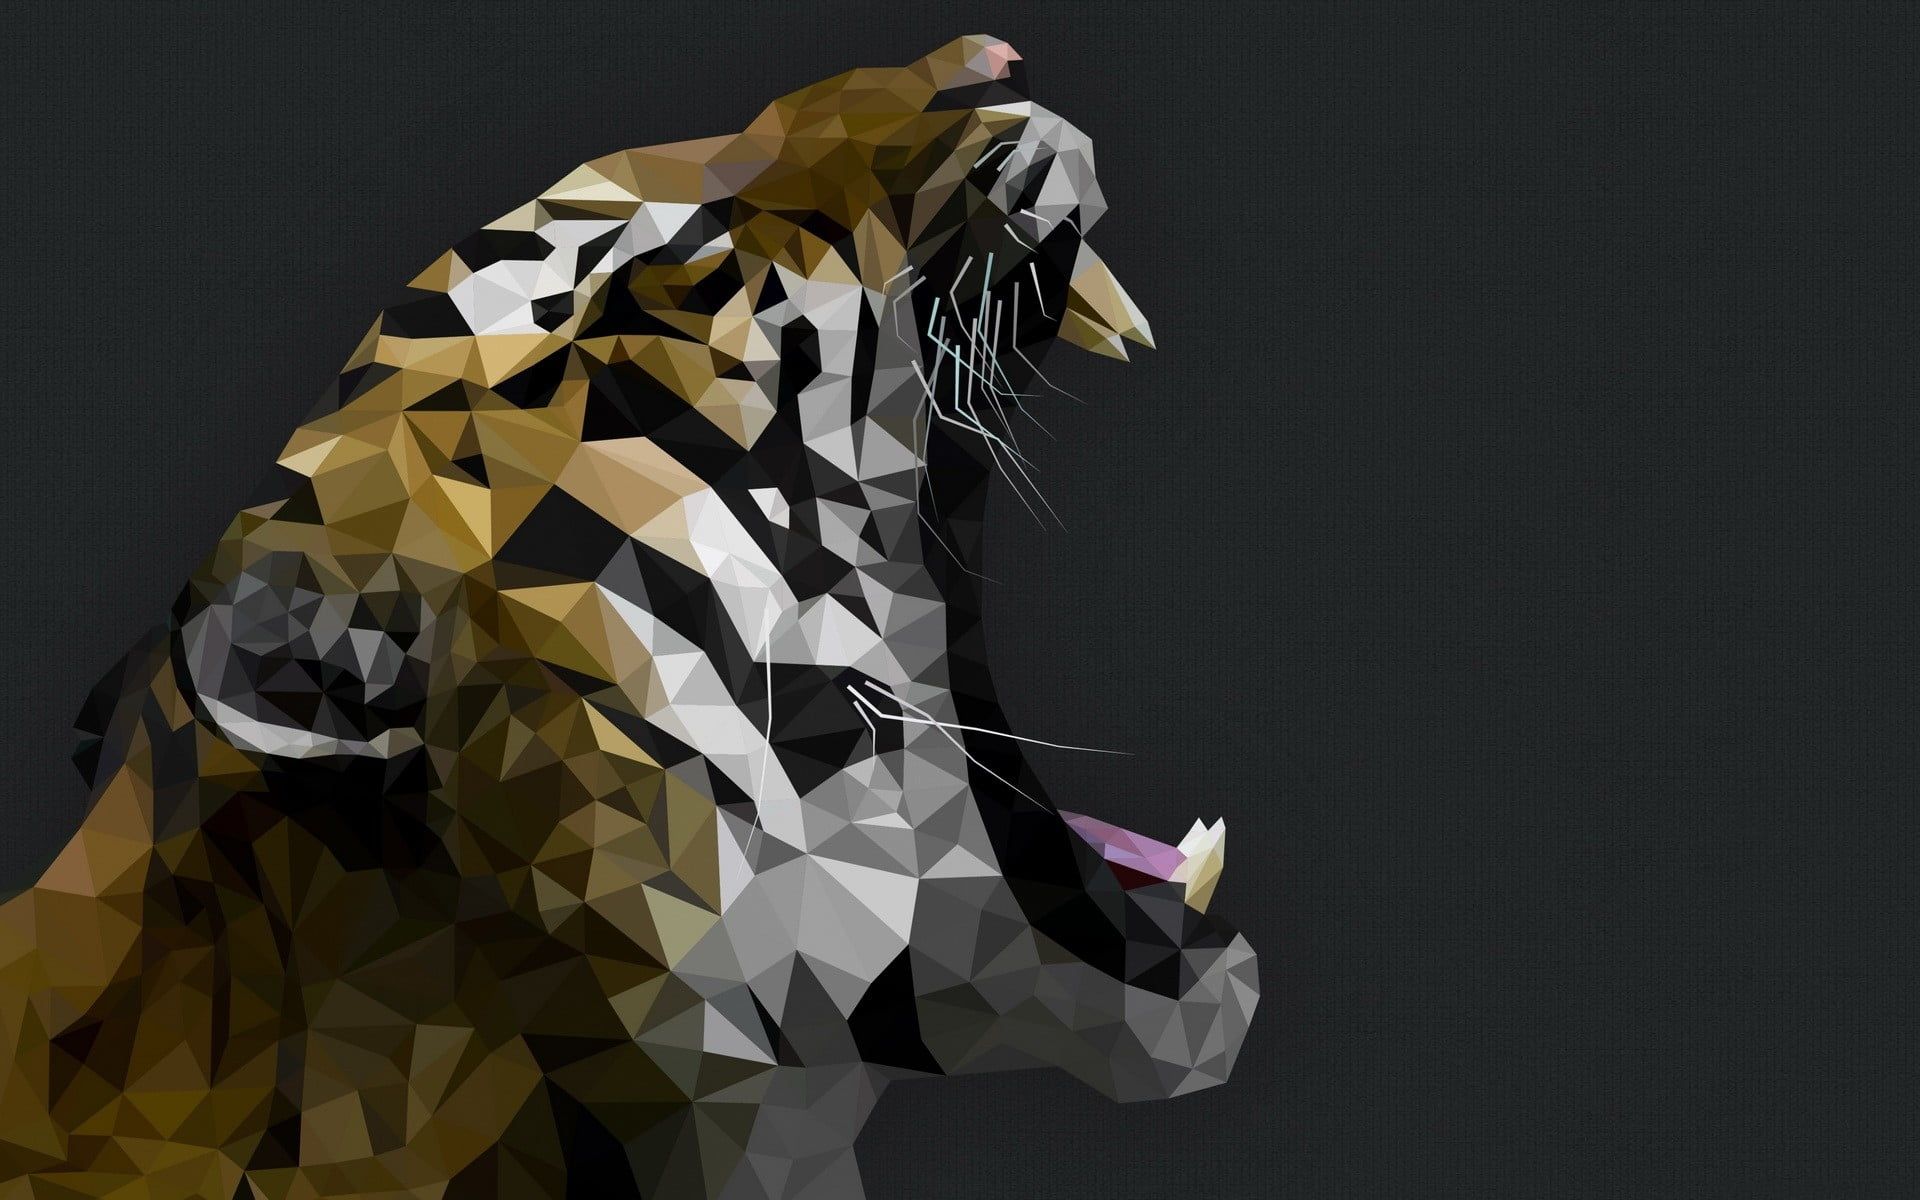 tiger mosaic artwork #tiger gray background #animals low poly